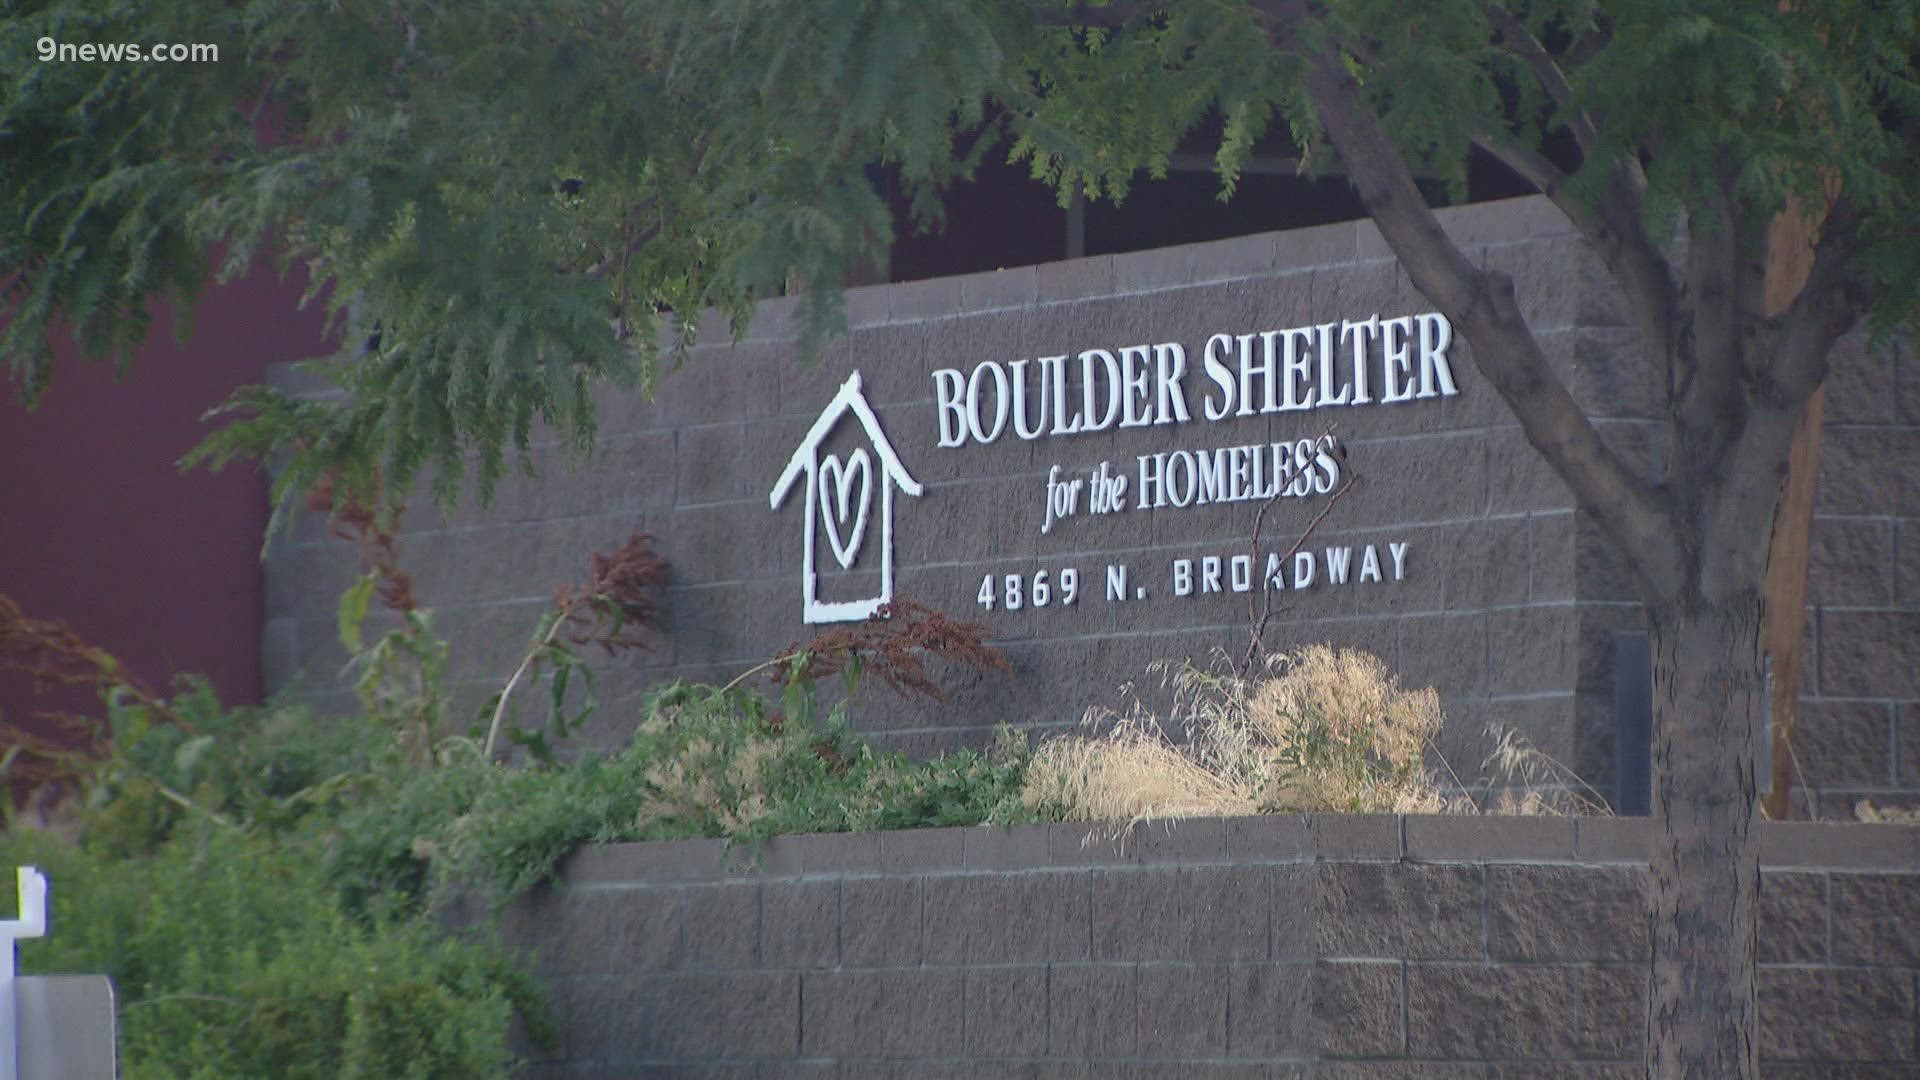 Current policy says unhoused people in Boulder must live there for at least 6 months before staying in a shelter during the warmer months.